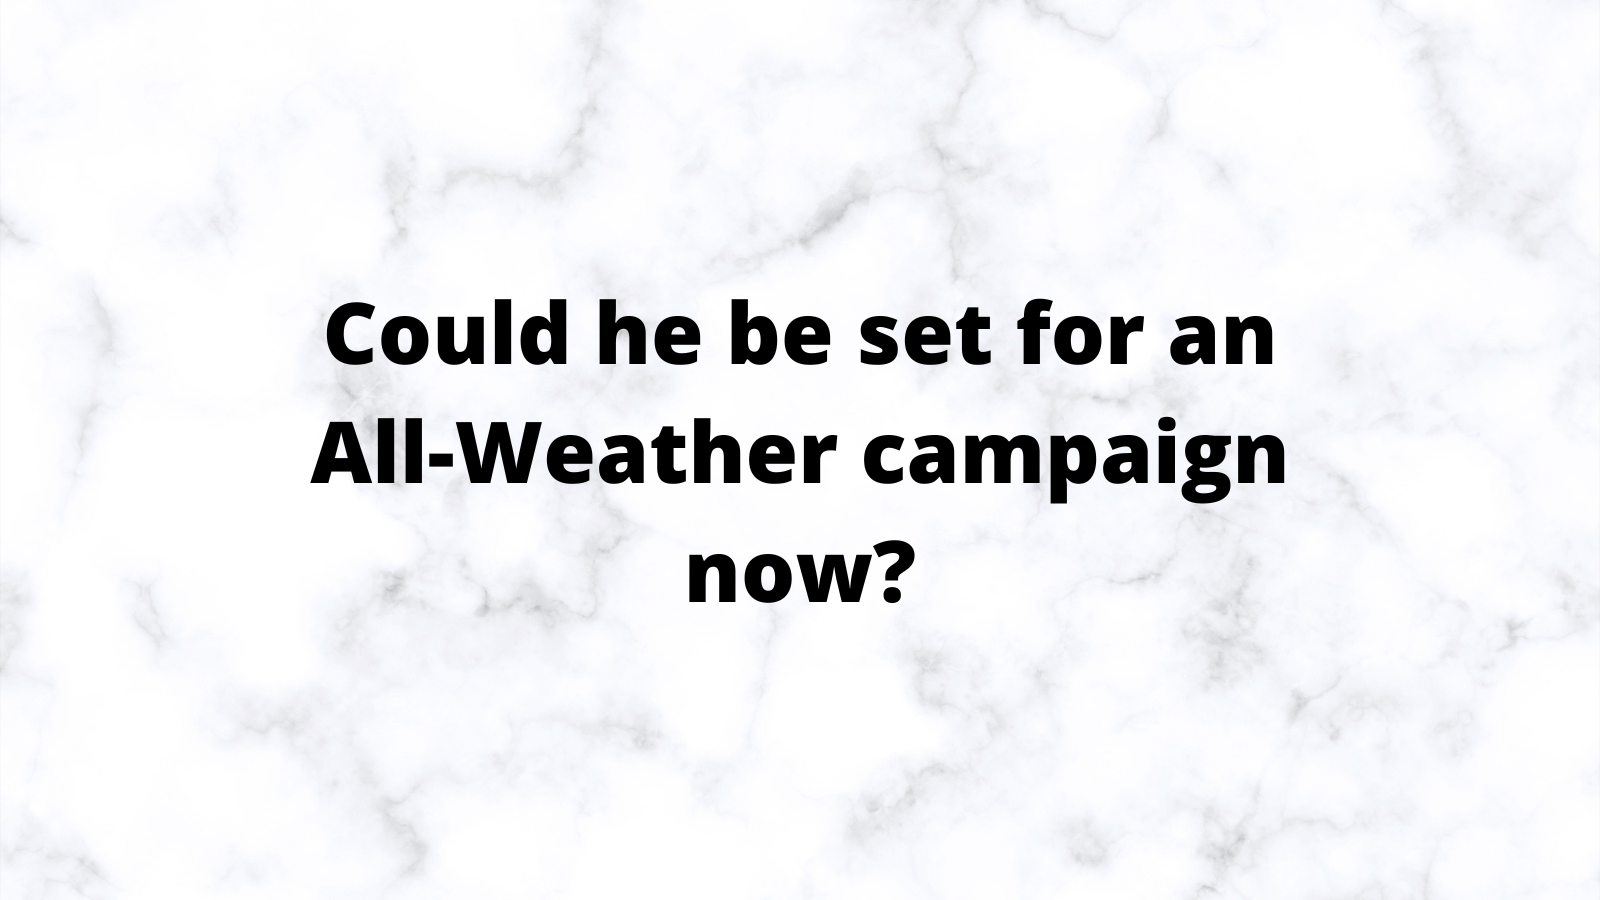 Could he be set for an All-Weather campaign now